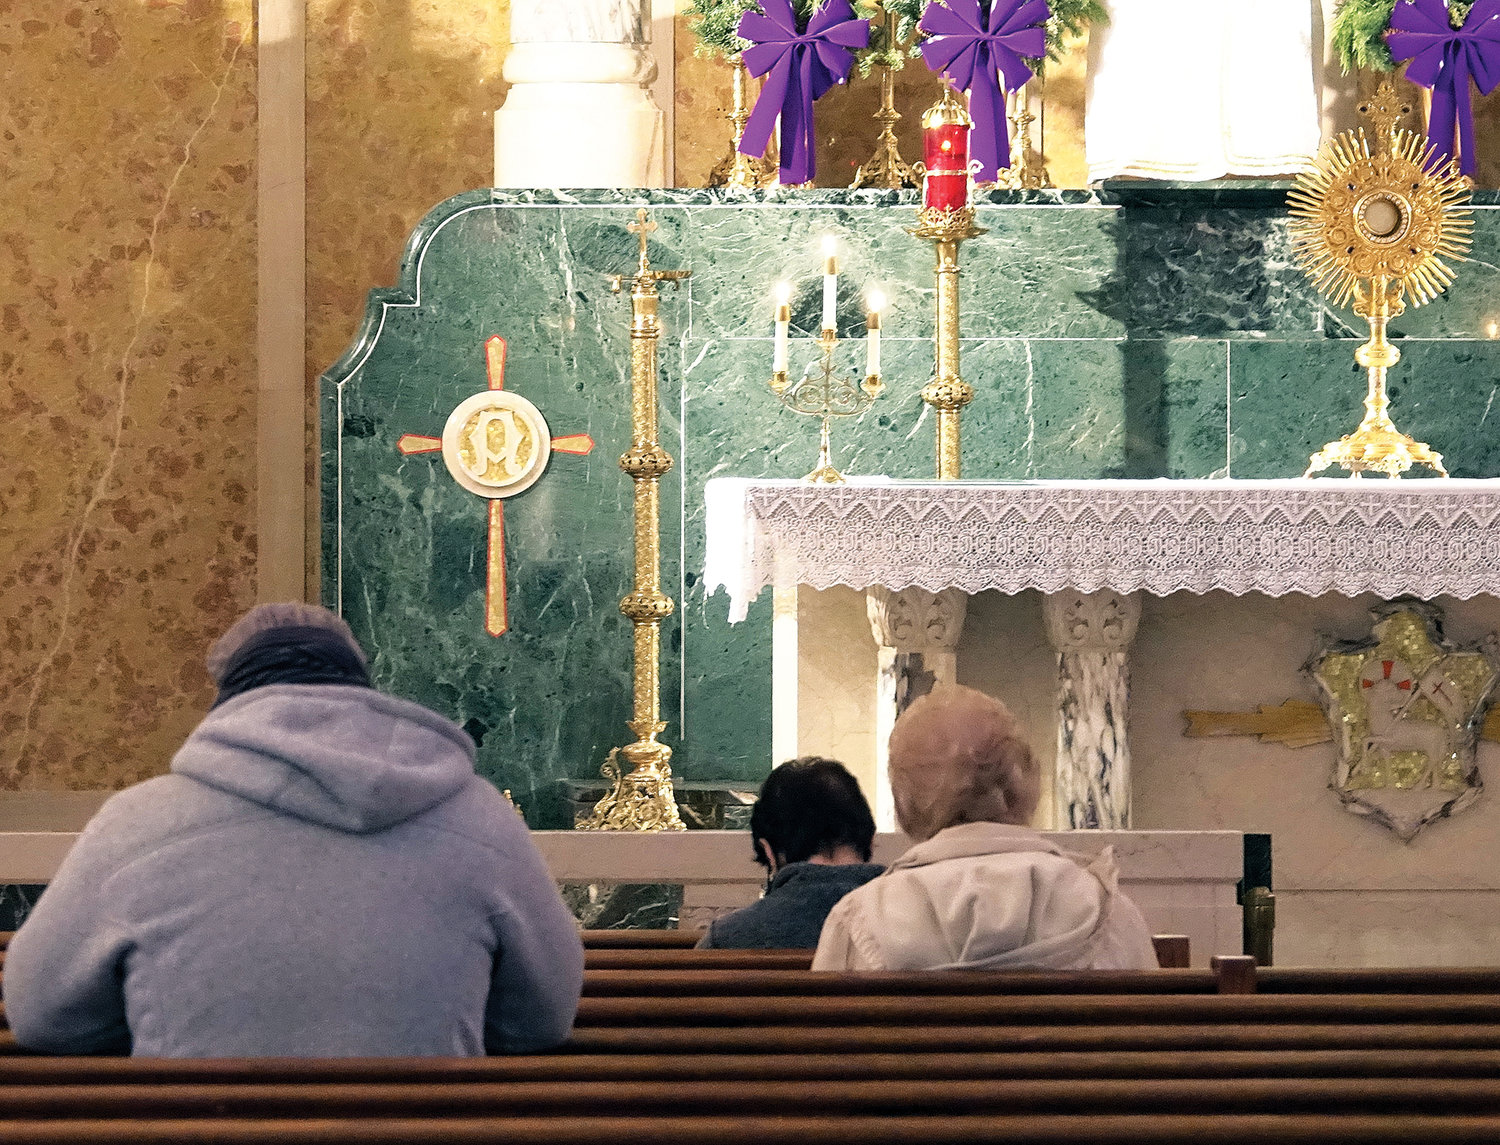 Members of the faithful pray during the liturgy. The parish hosted a Forty Hours Devotion Dec. 7-9 in conjunction with the Feast Day and conclusion of the universal Church’s Year of St. Joseph.